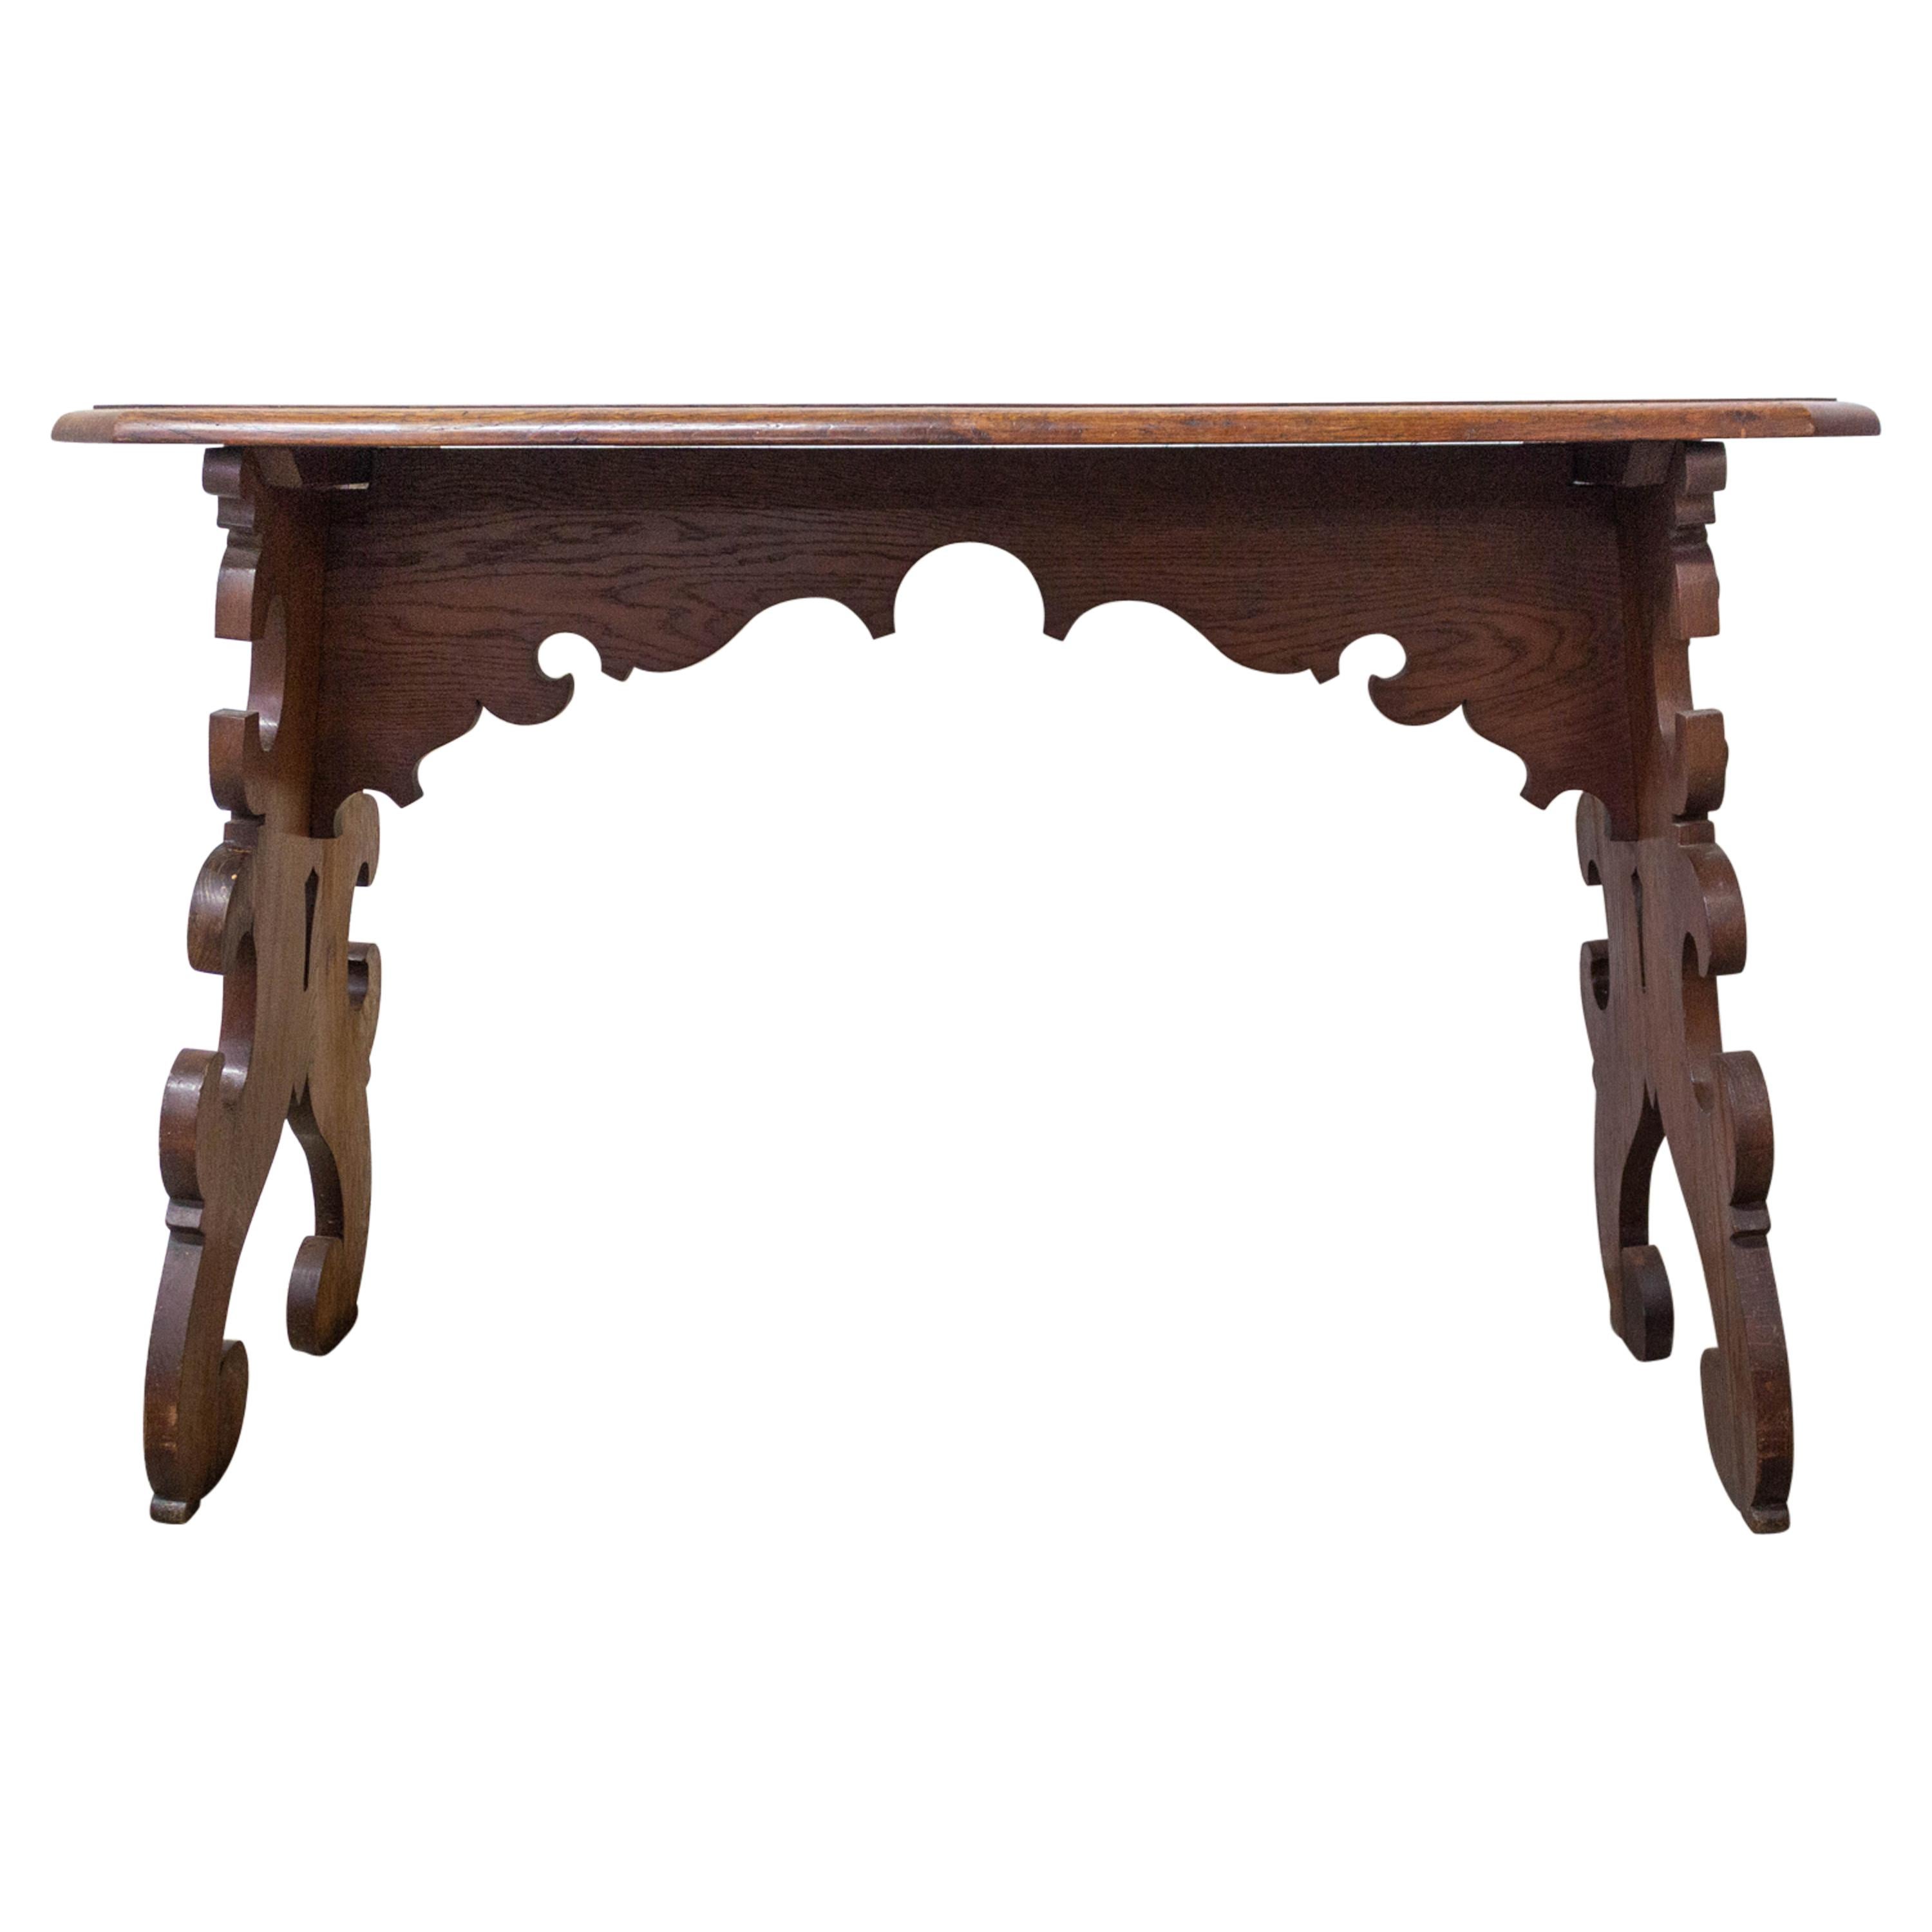 Side Table Hall or Console Table Carved Spanish Colonial Revival